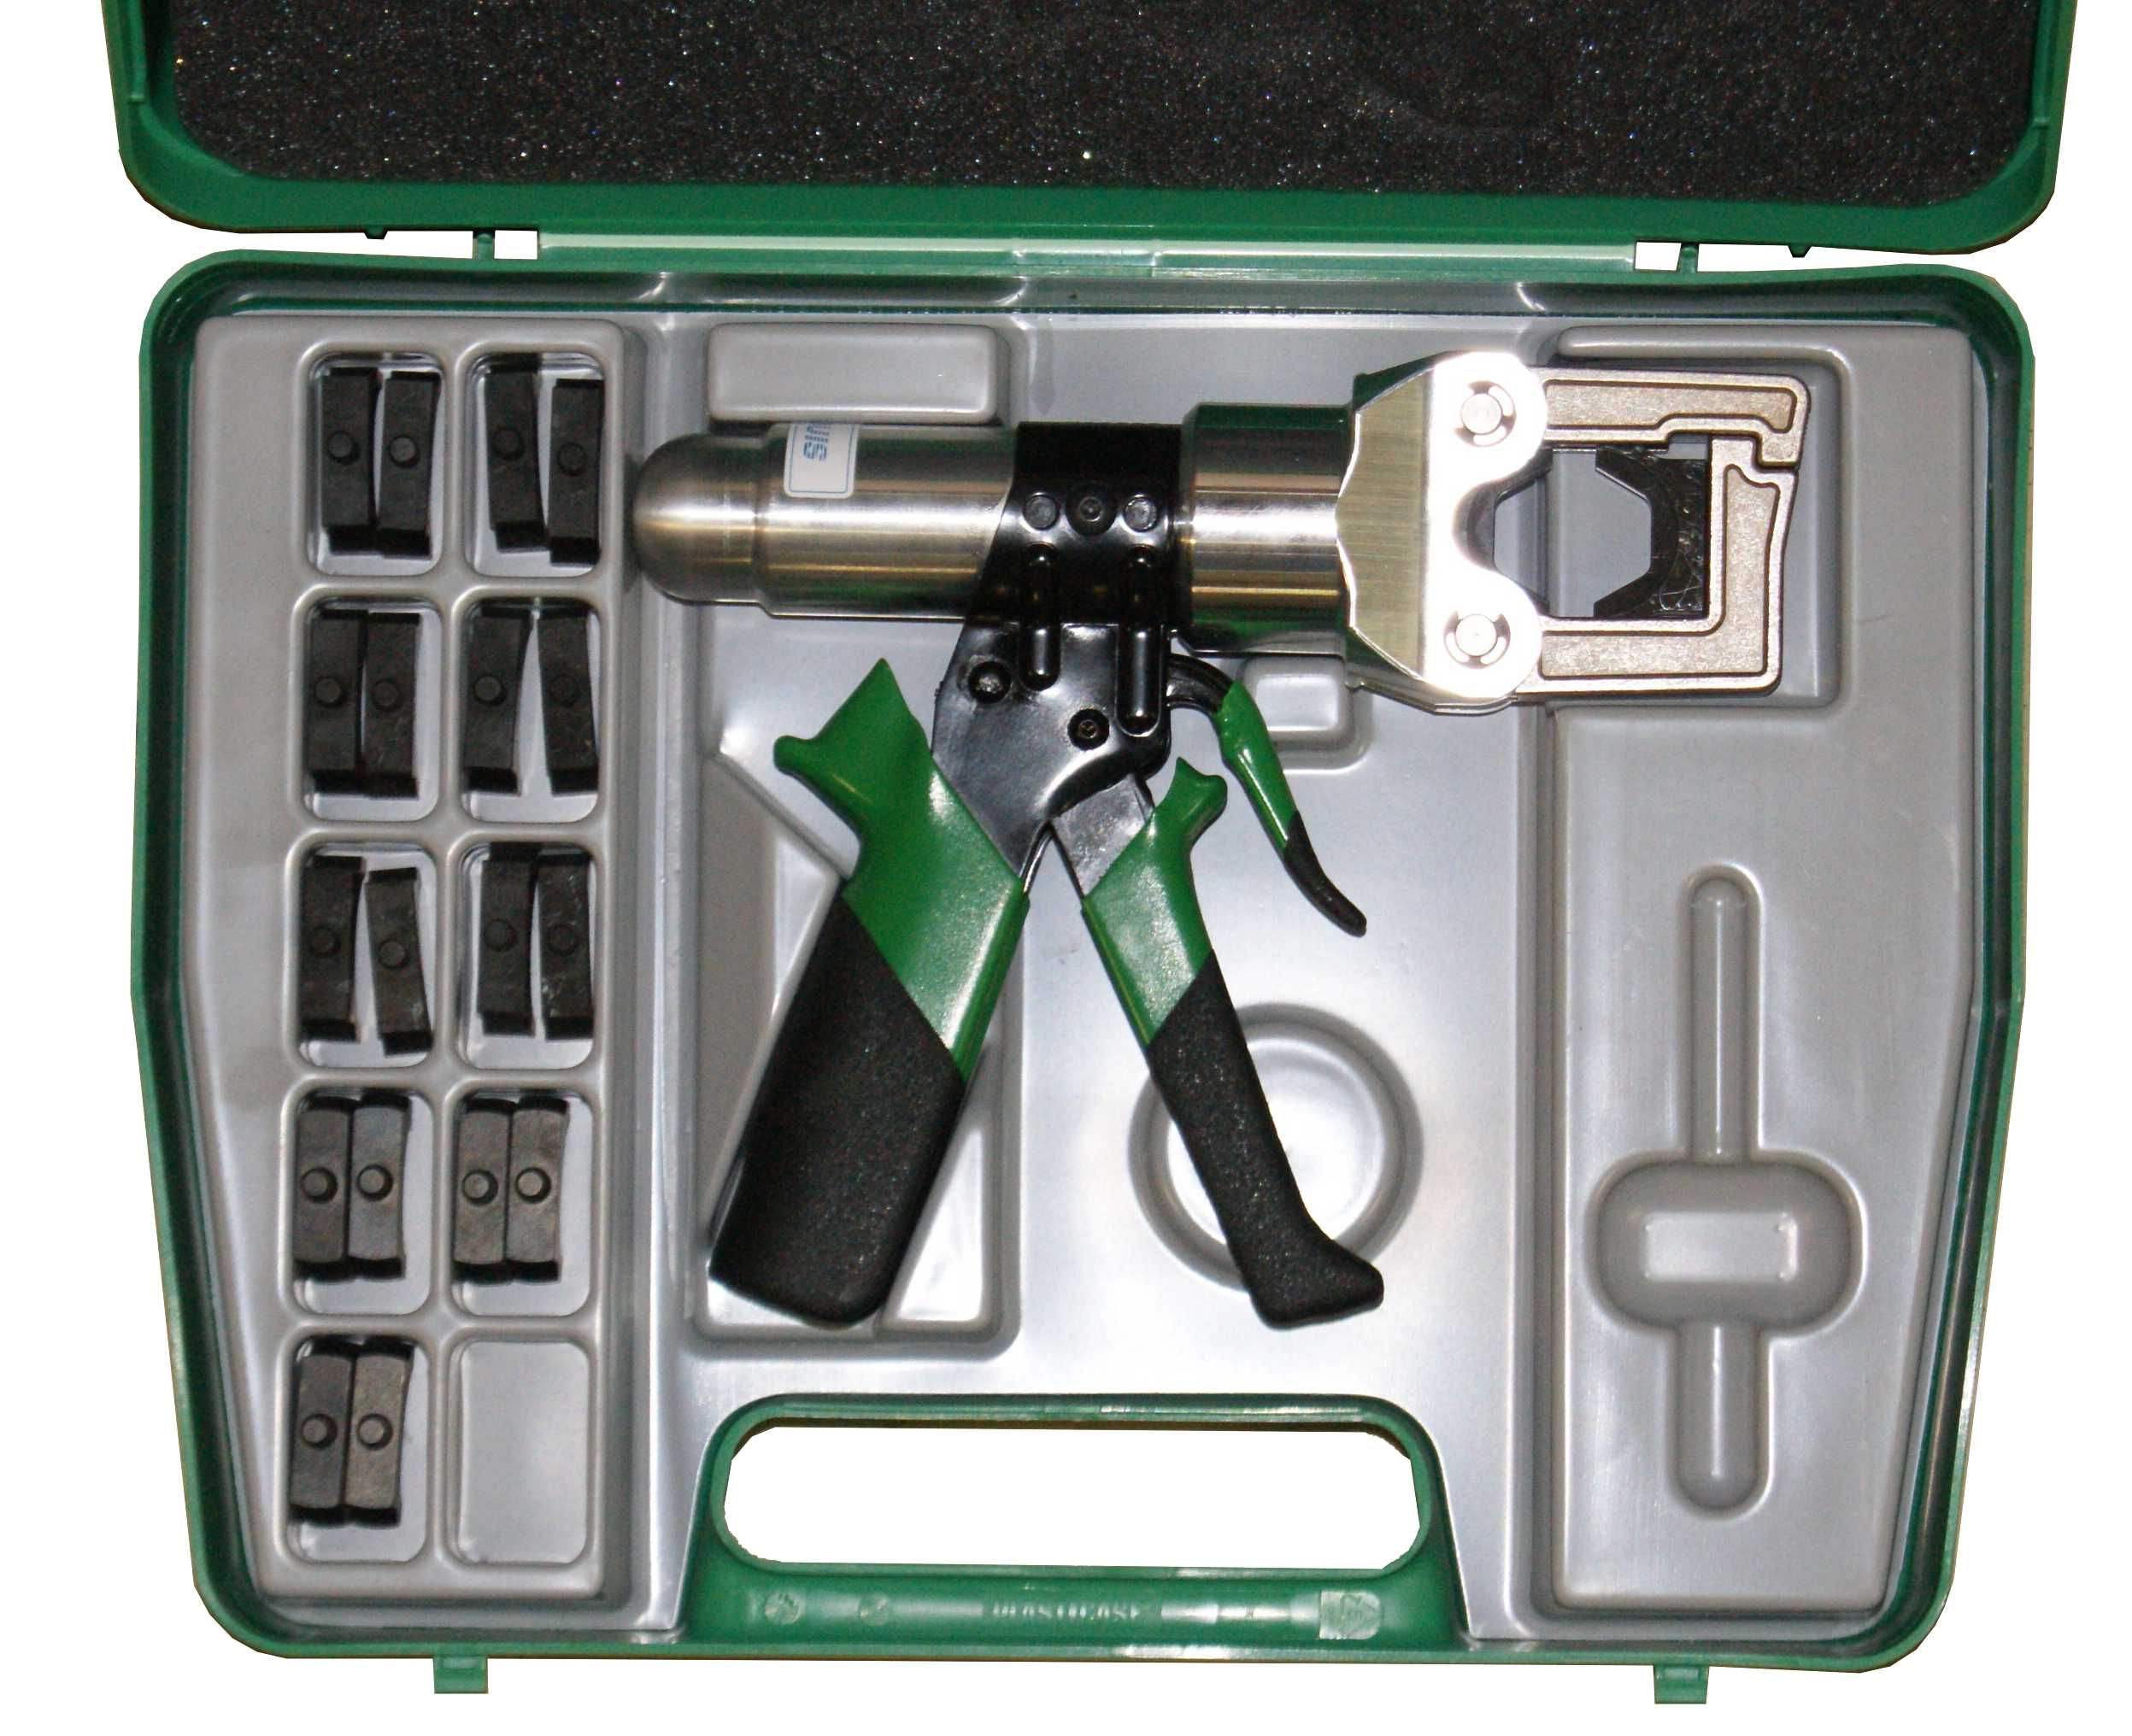 HP36 - Manual operated hydraulic crimping tool, 35 kN, for inserts series "35"